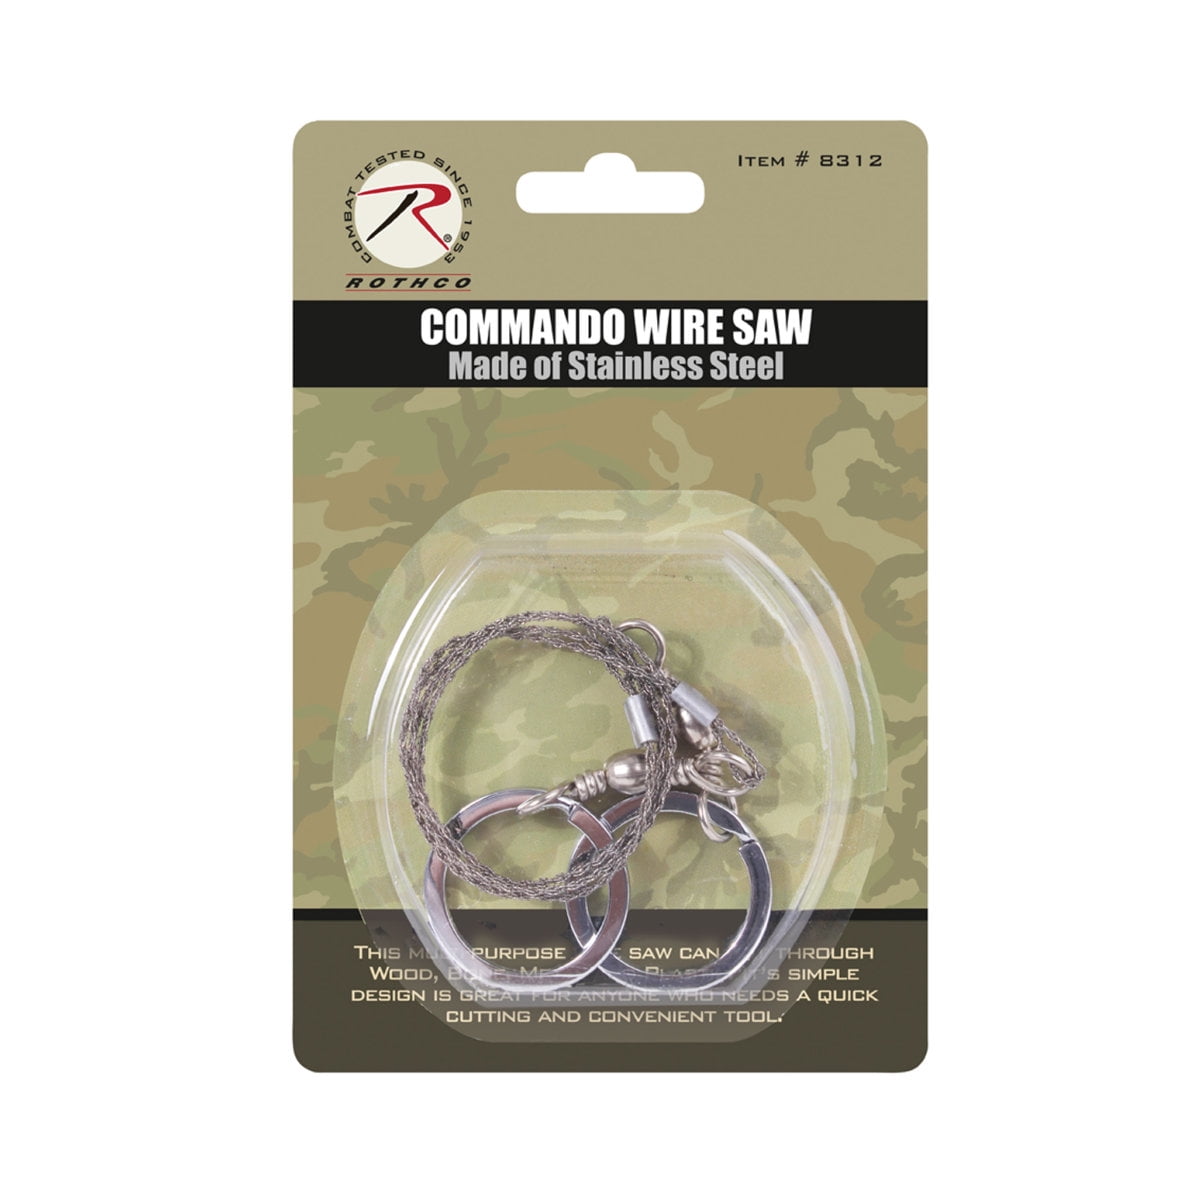 NEW! Camping Saw High Quality Commando Wire Survival 